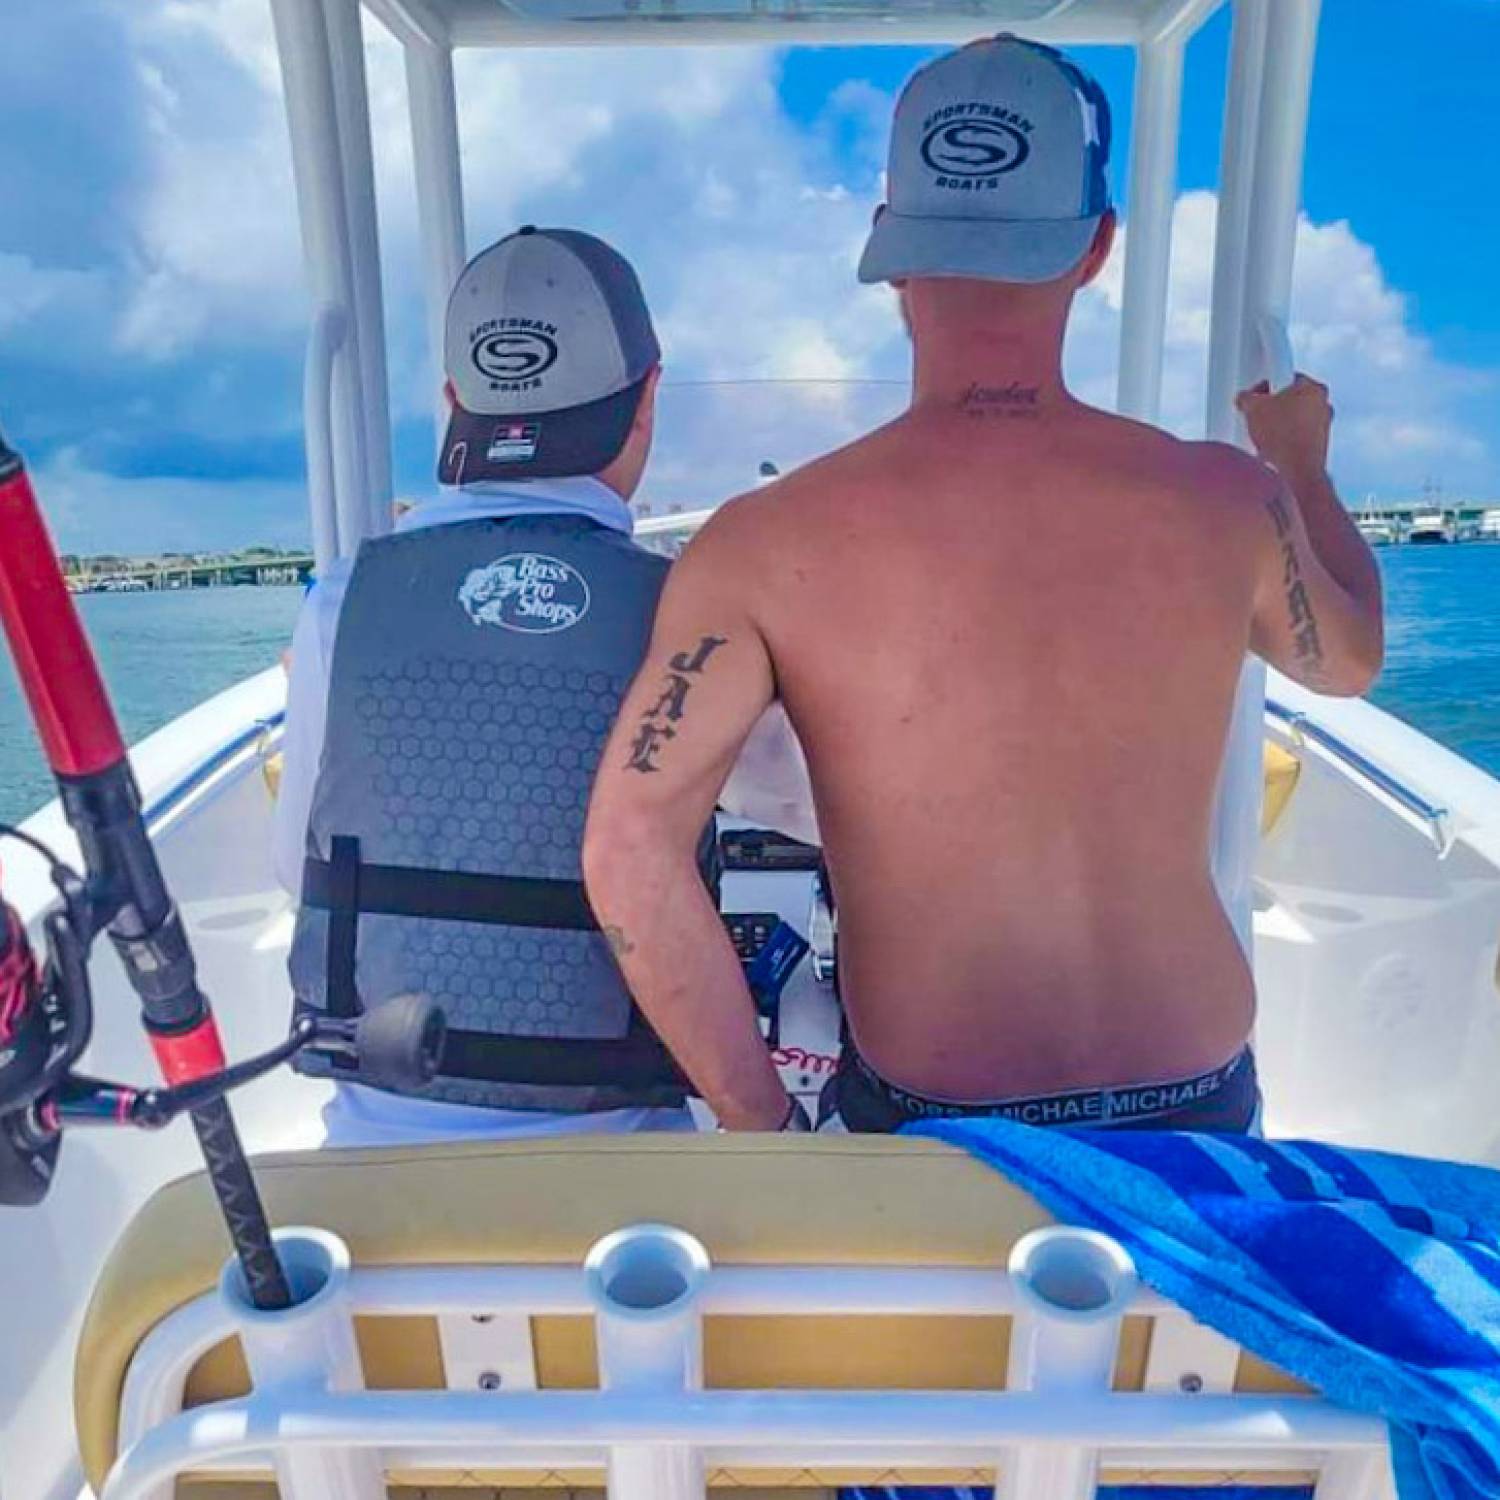 Title: Father-Son moments🩵💙 - On board their Sportsman Open 232 Center Console - Location: St. Augustine, FL ICW. Participating in the Photo Contest #SportsmanAugust2023